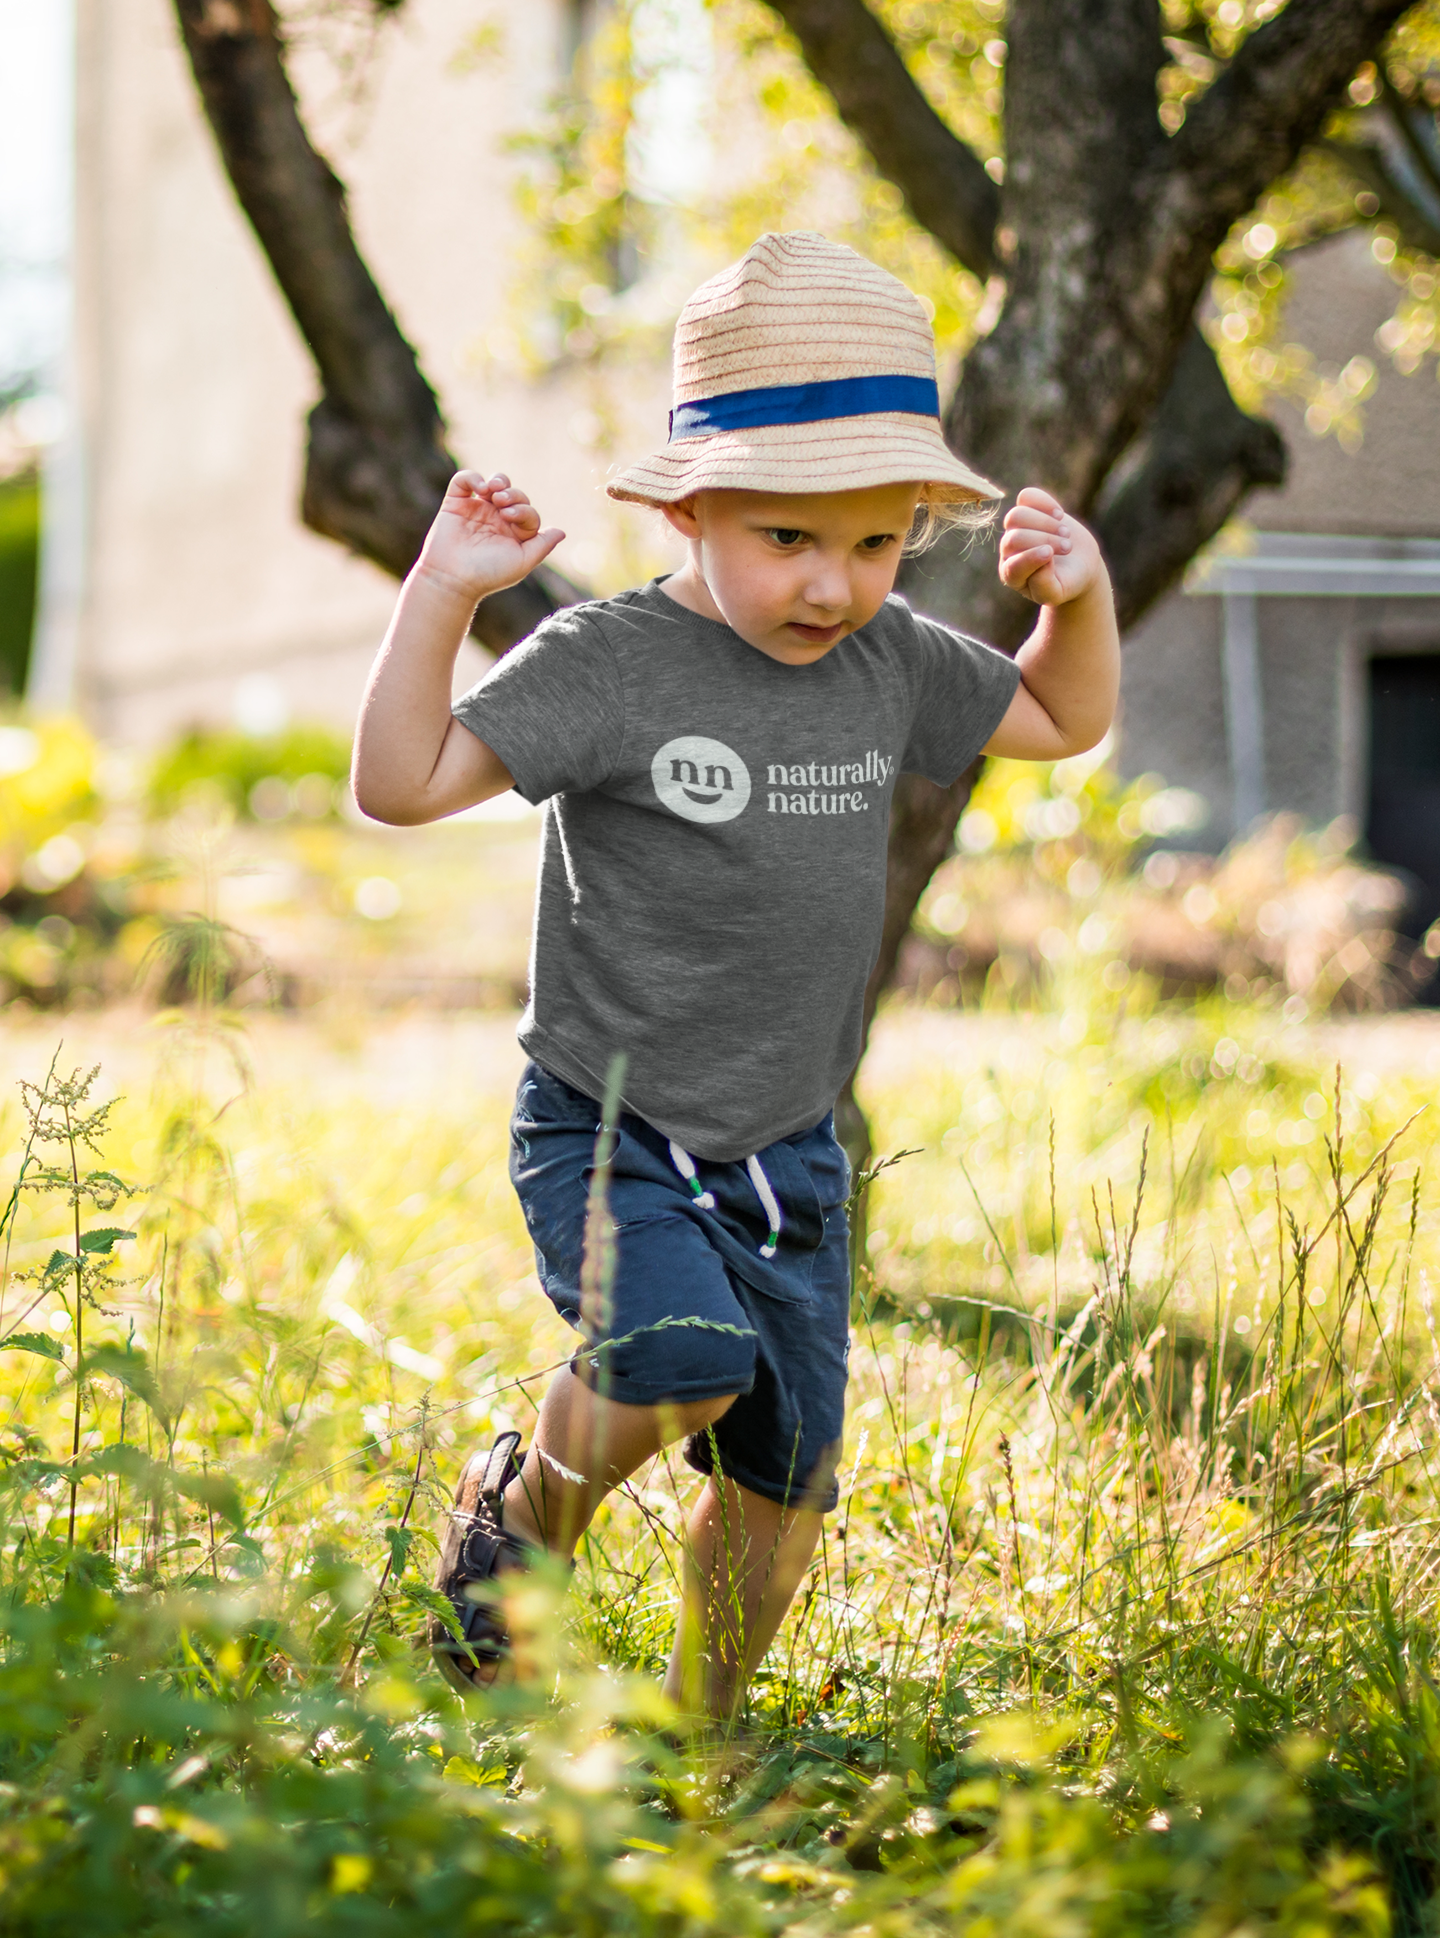 Naturally Nature Toddler T-shirt, Sizes 2T - 6T